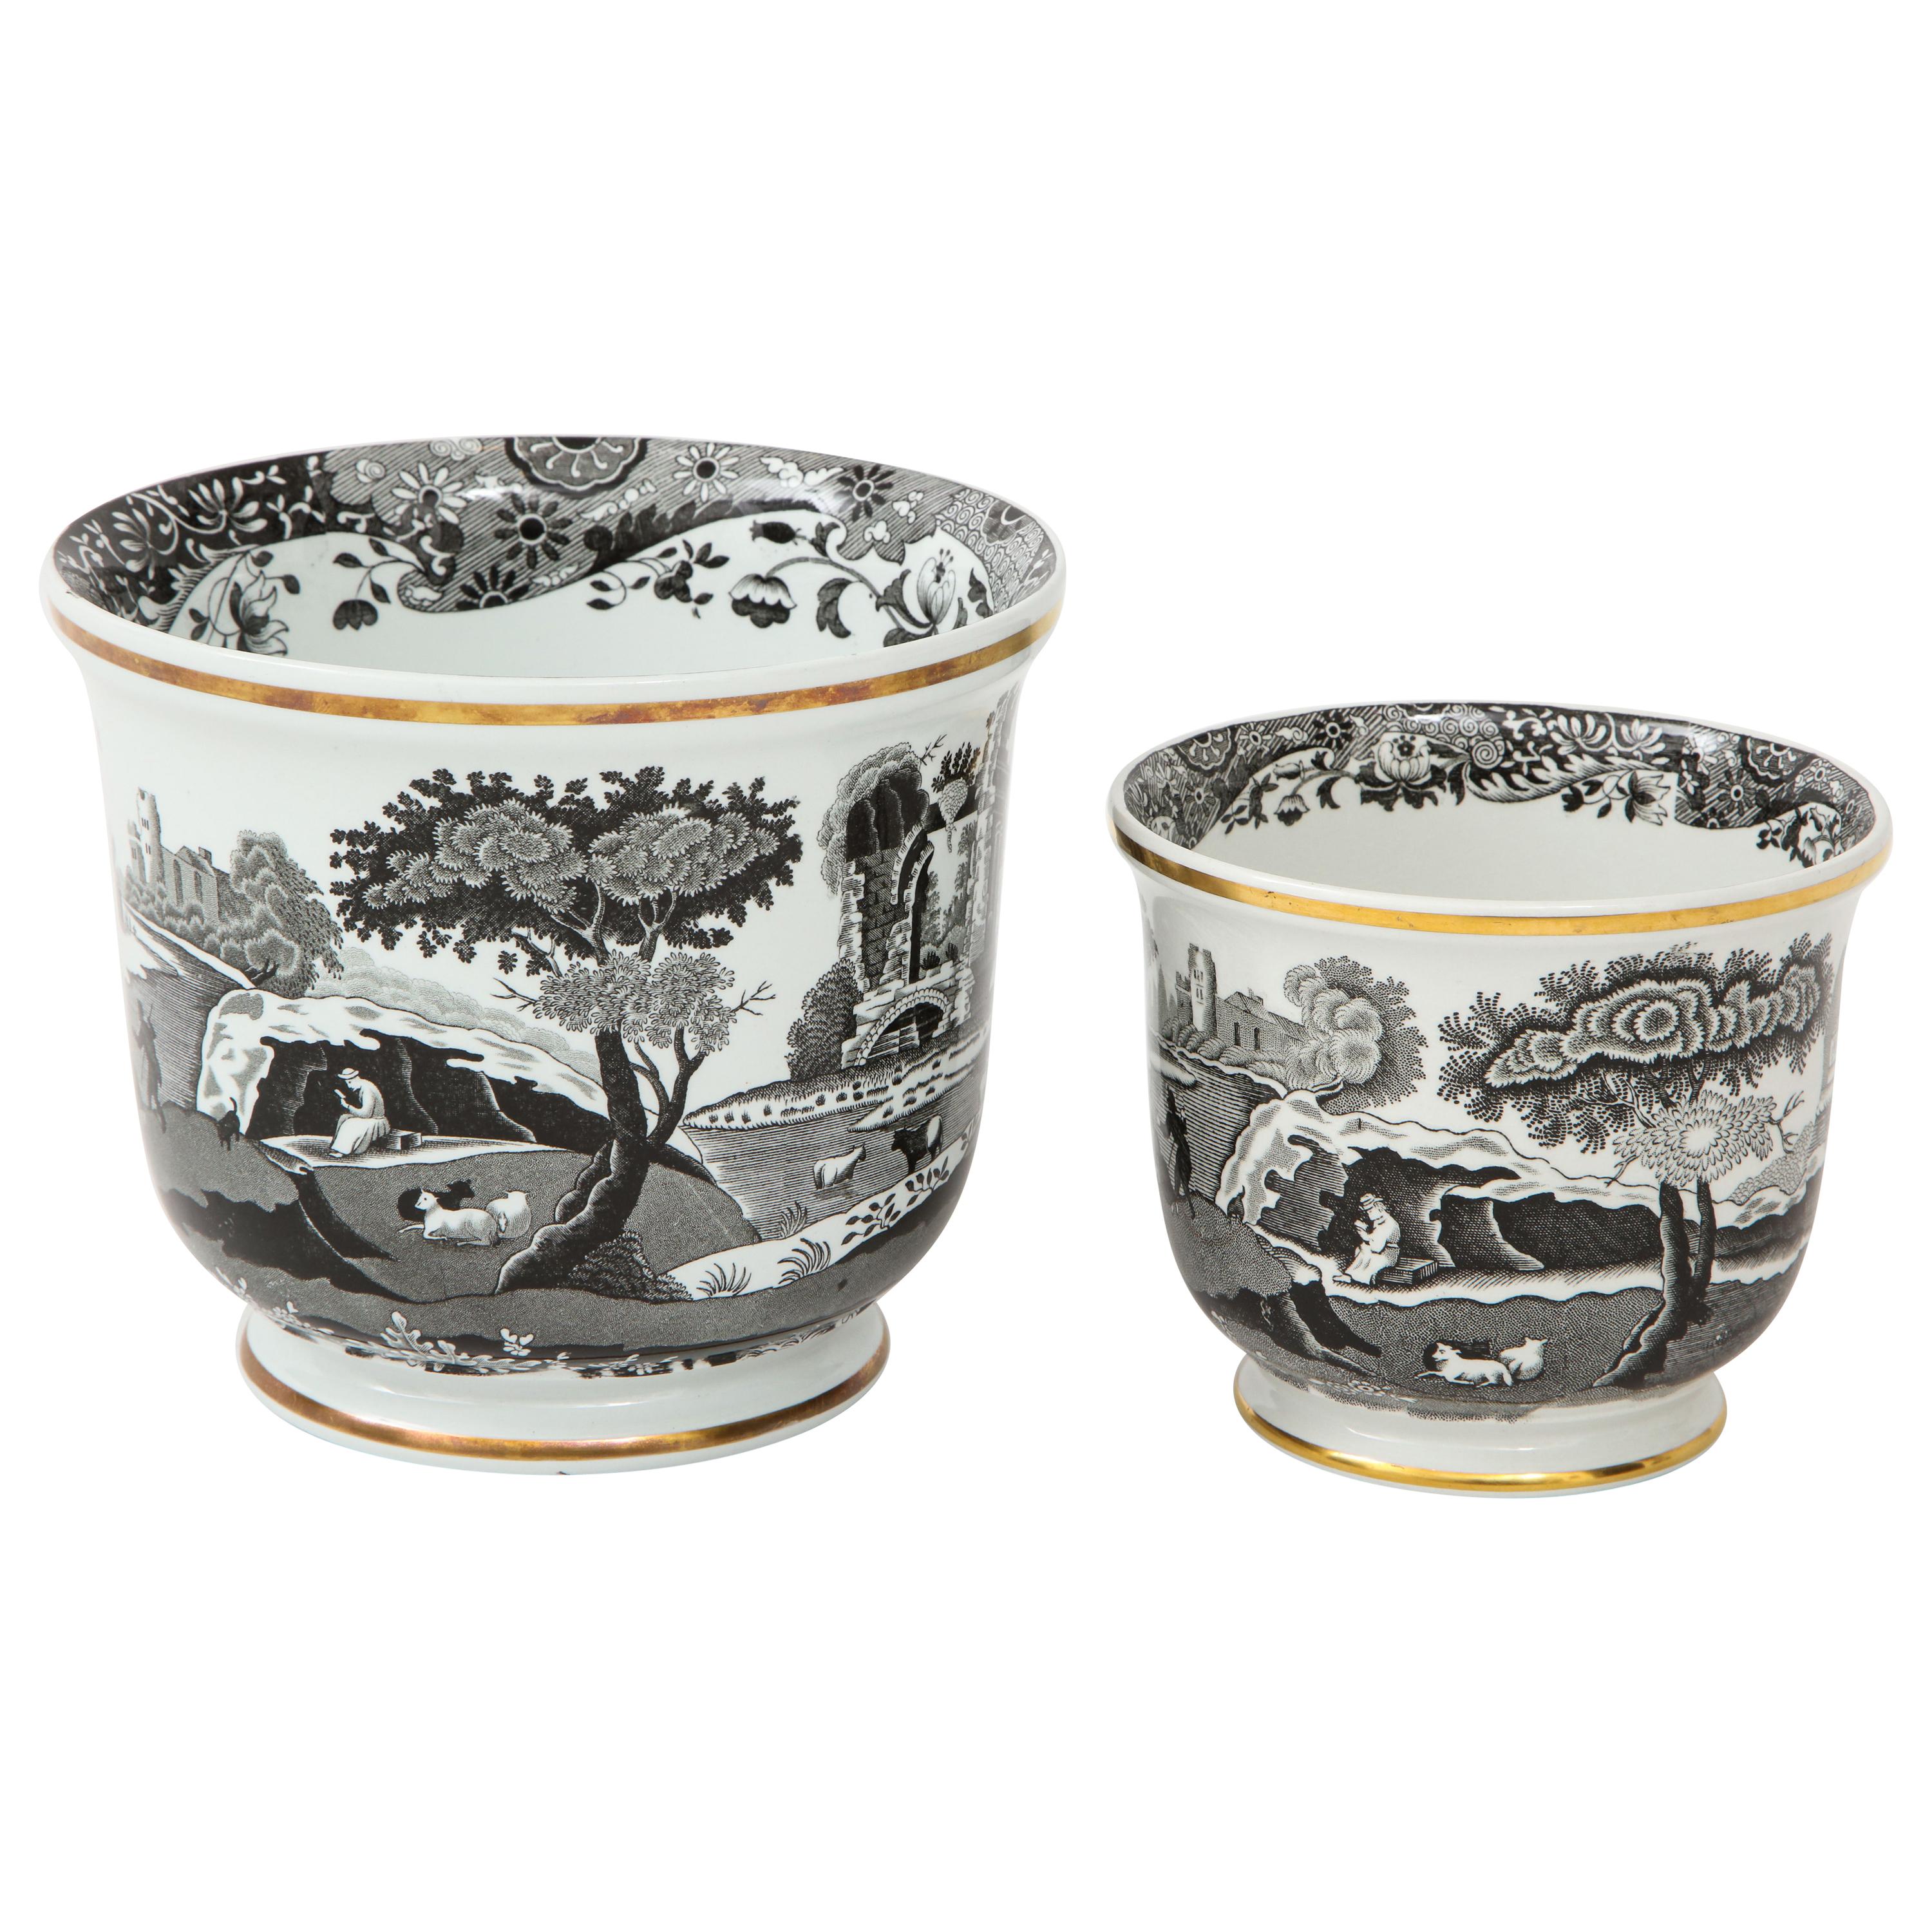 Pair of Spode Black and White Cachepots